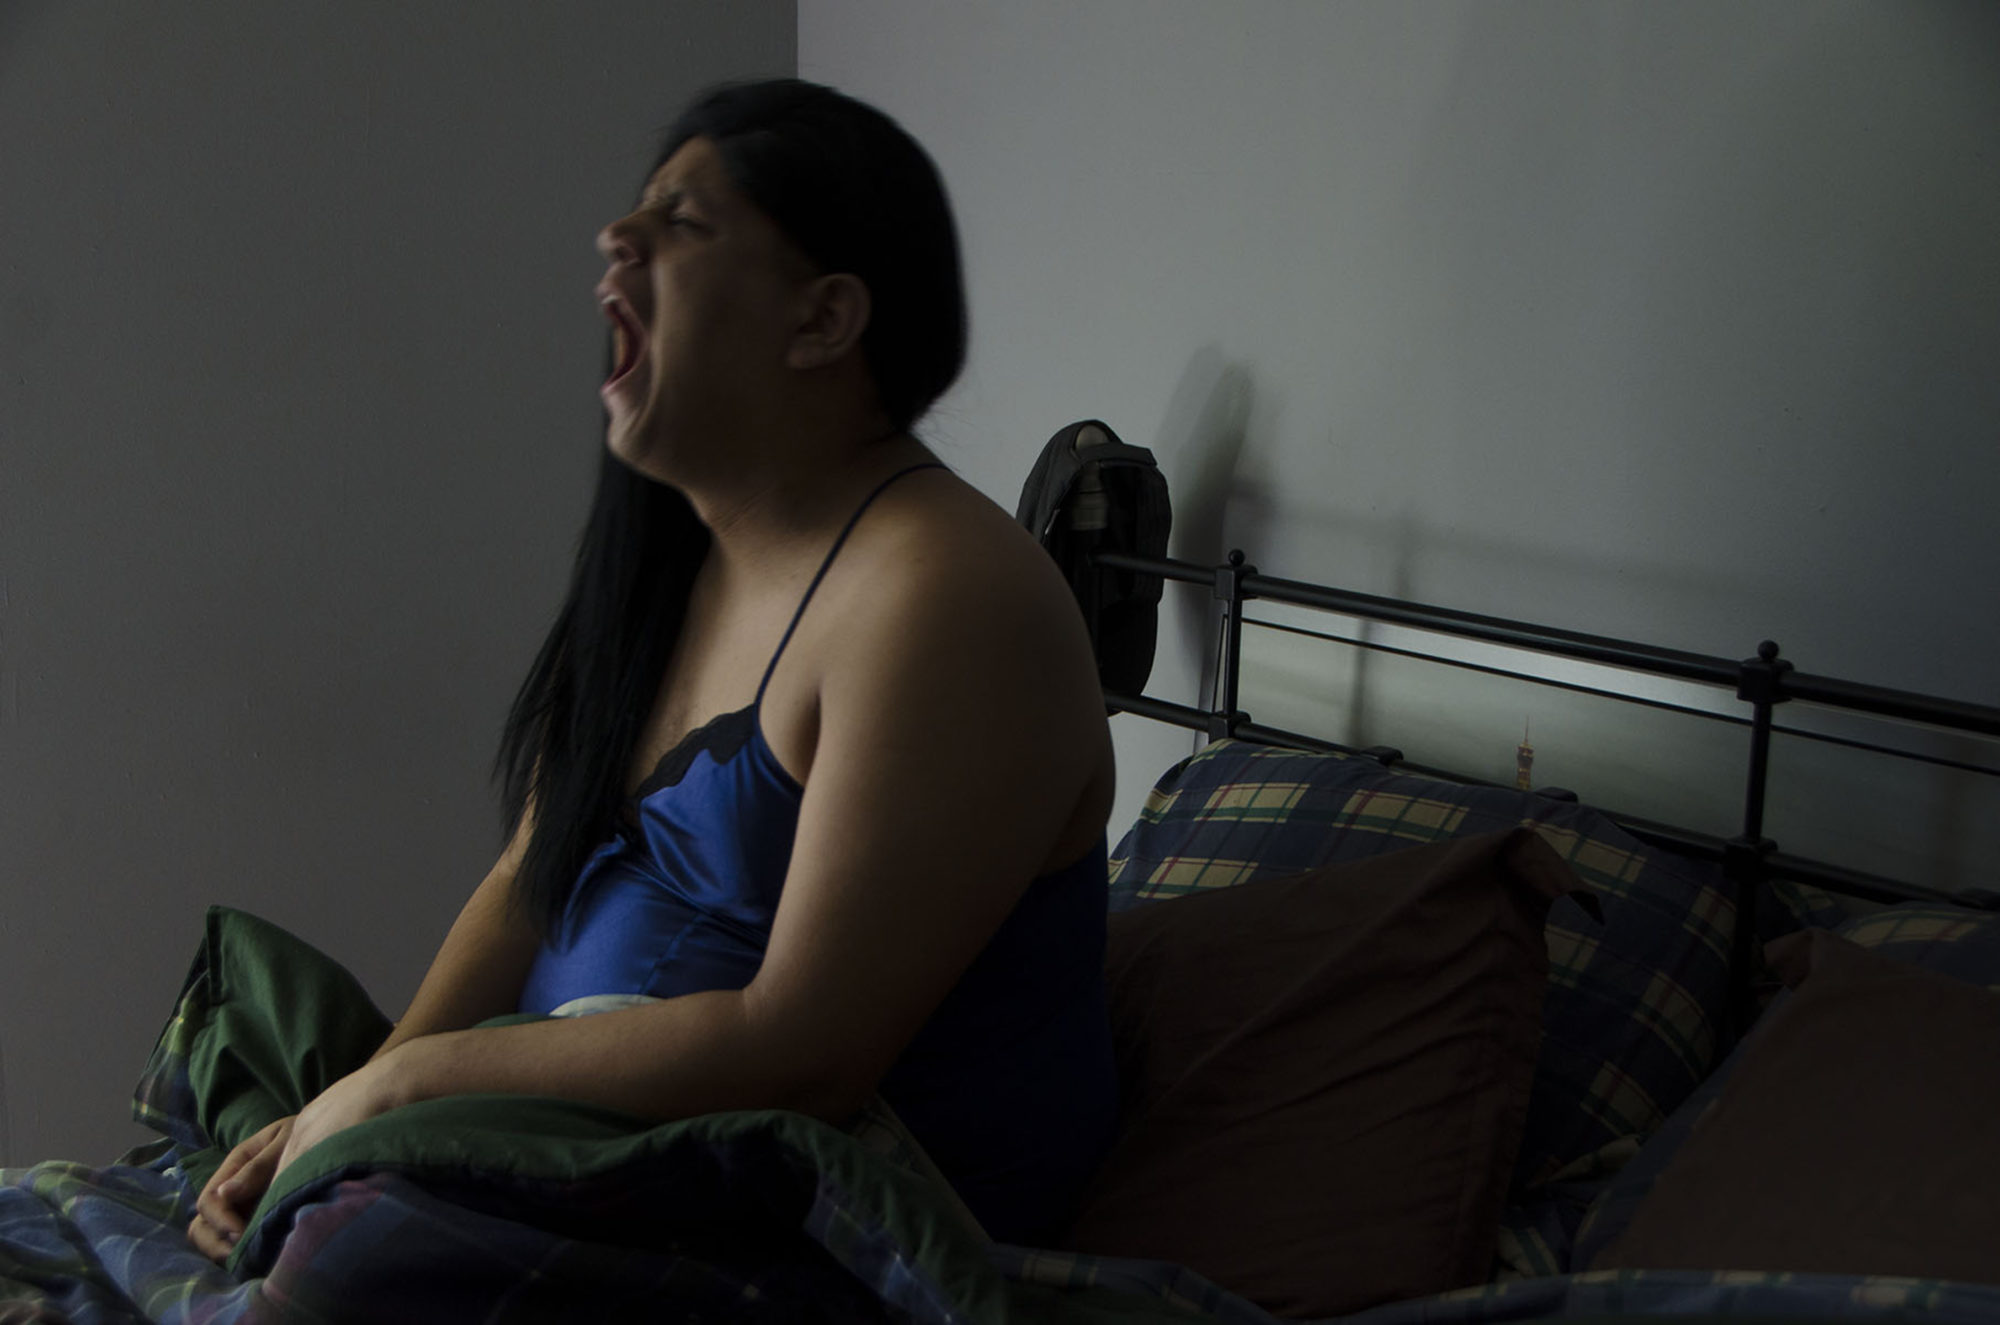 A woman sits in bed, either yelling, or yawning